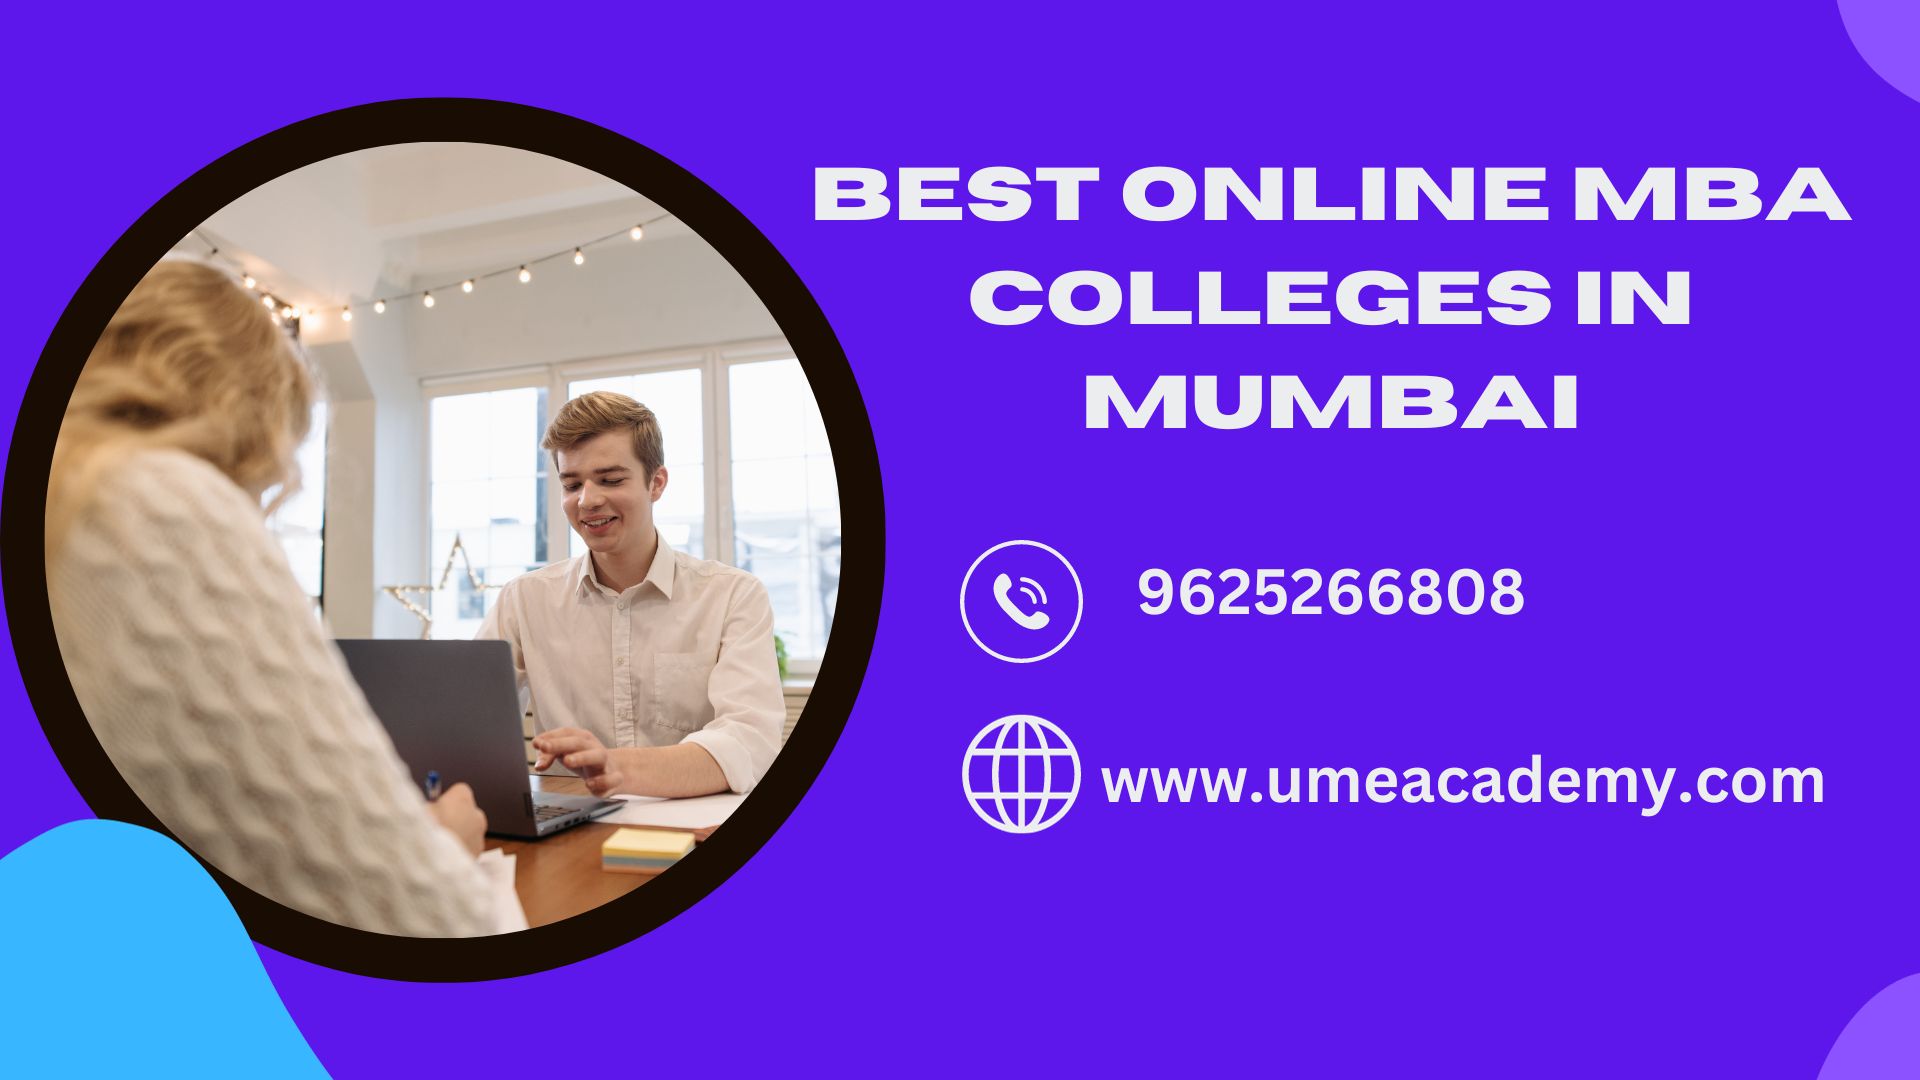 Best Online MBA Colleges In Mumbai - Globe Growing Solutions is now ...